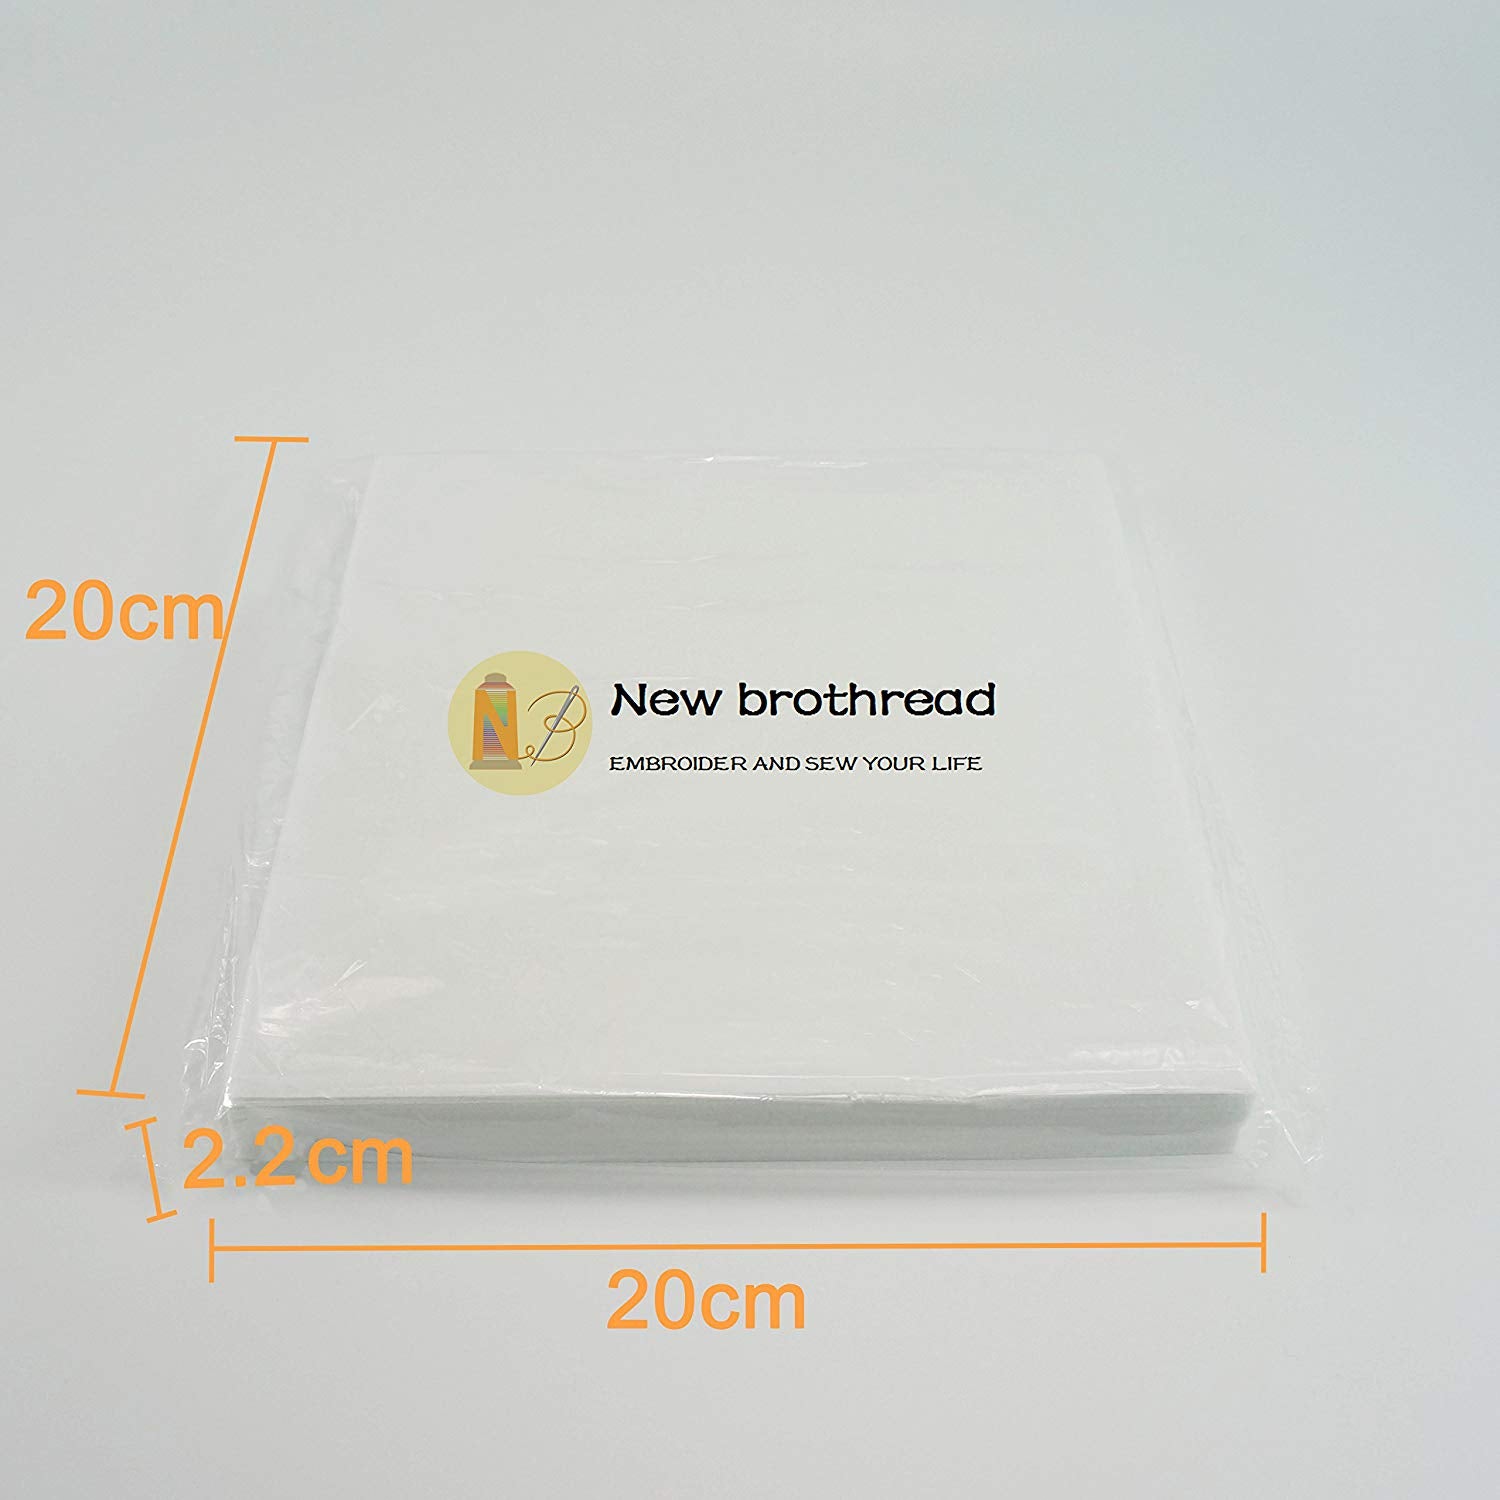 Embroidery Stabilizer Backing - Regular Tearaway - 8x8 200 Sheets